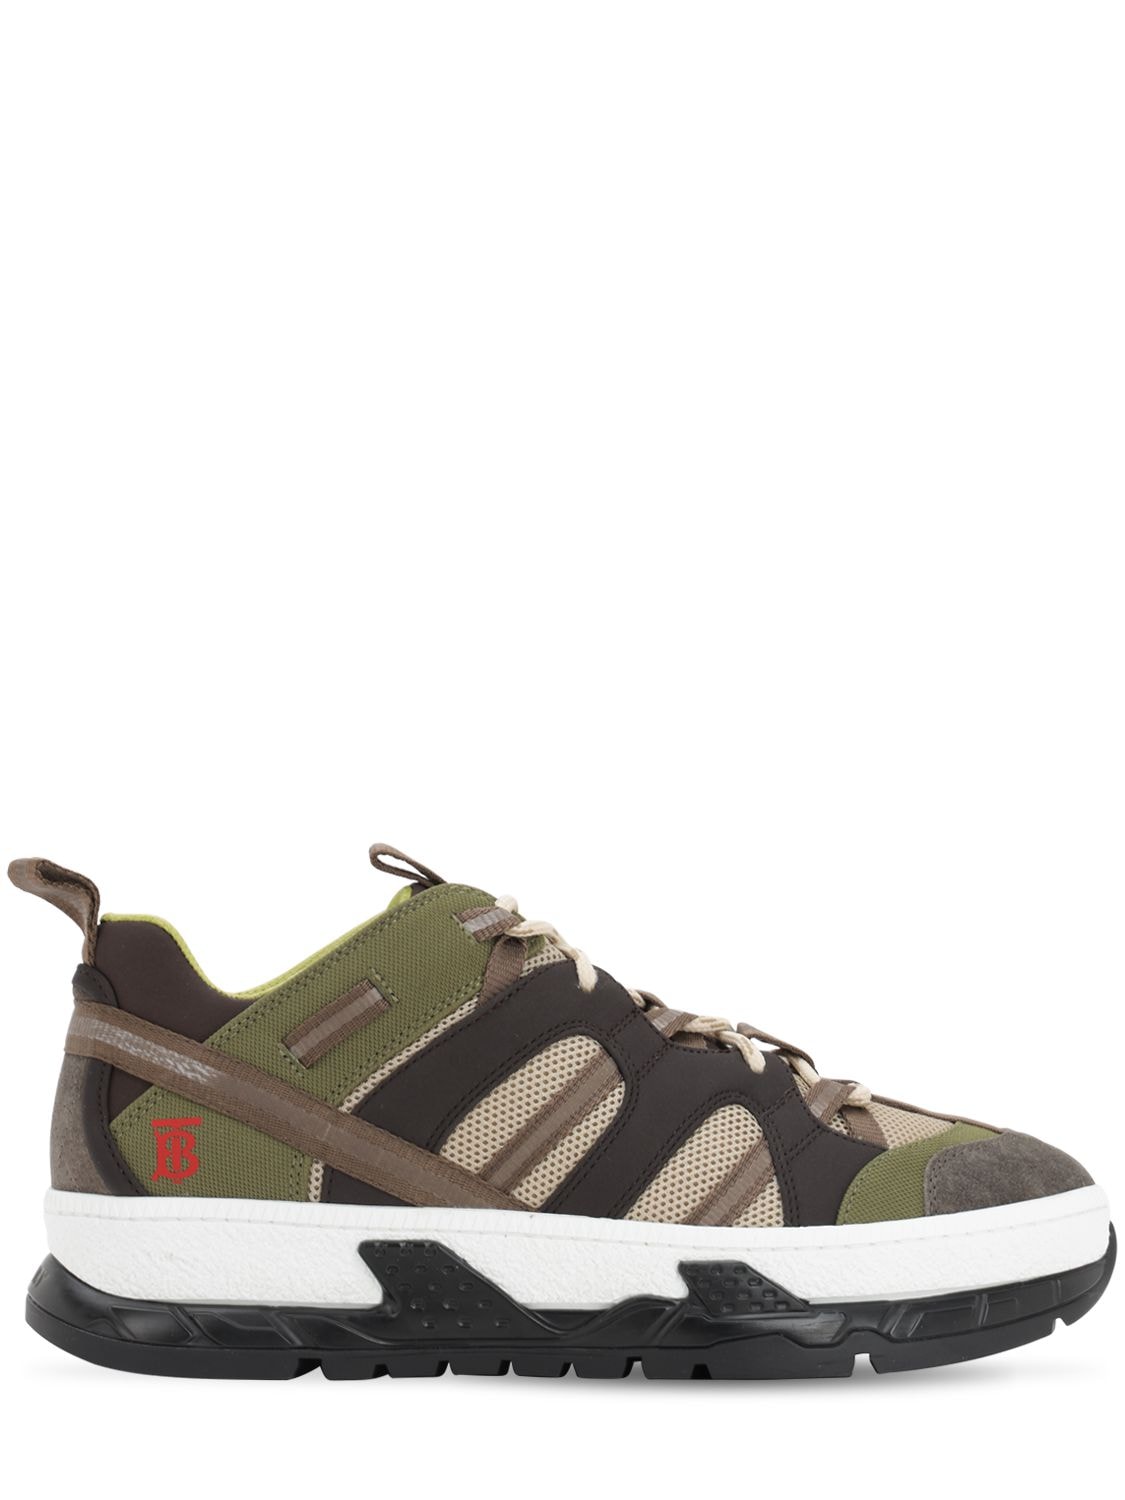 Low-cut Mixed Media Sneakers In Green 